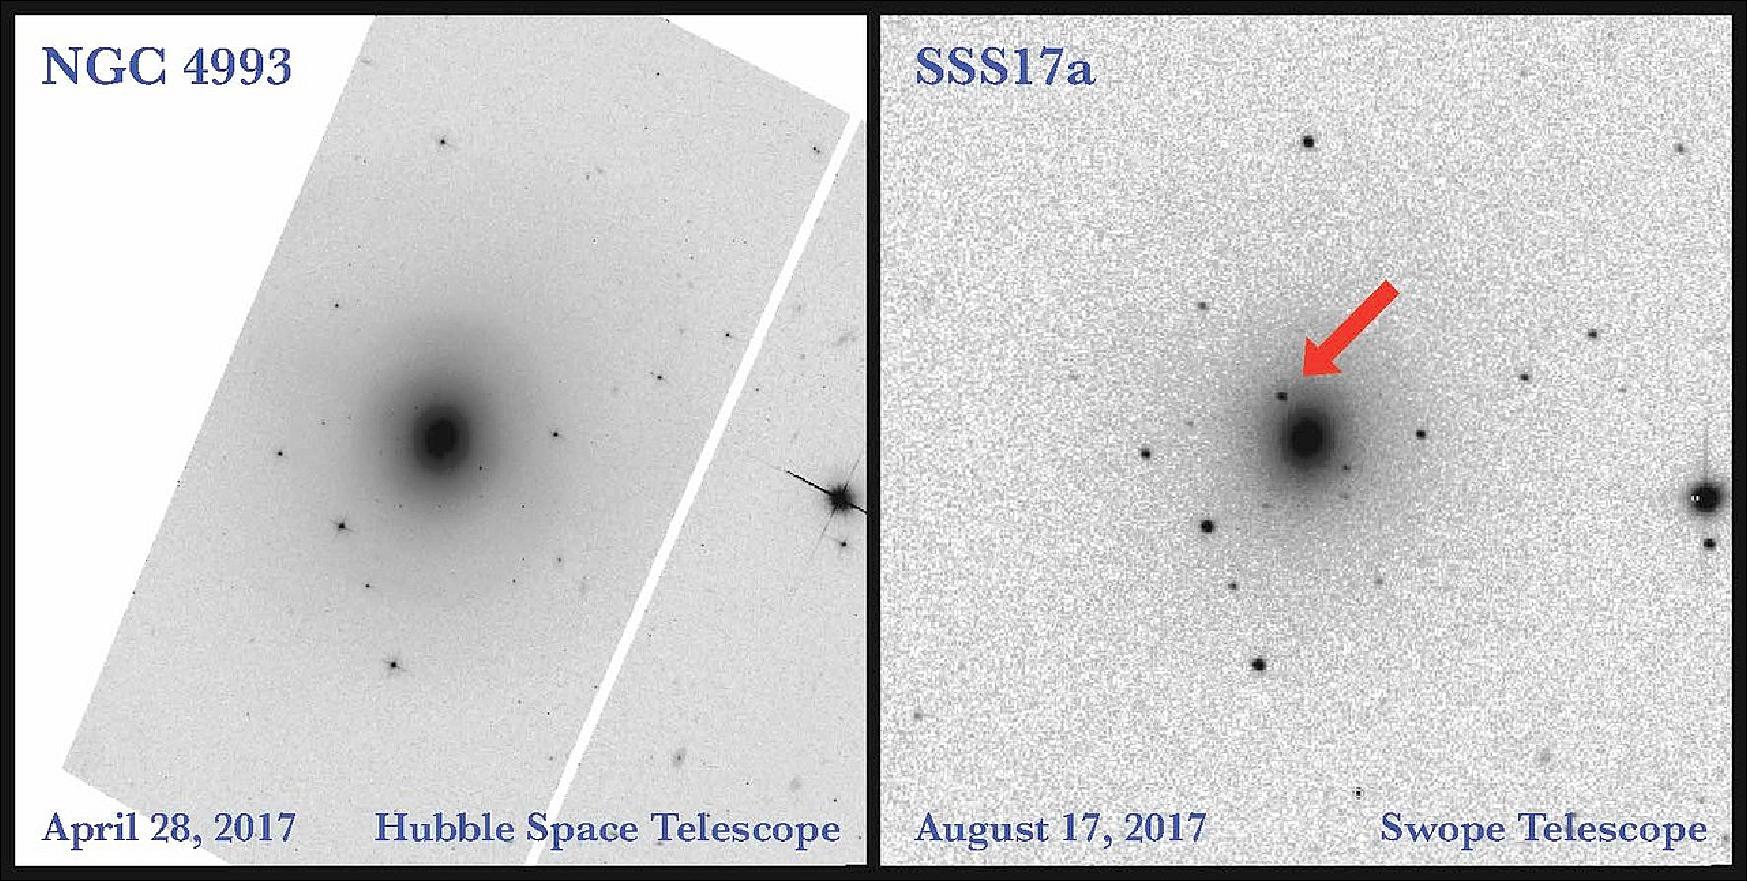 Figure 35: The first image of an 'optical transient' resulting from the merger of two neutron stars, and the first image of an optical counterpart to a gravitational wave detection. The box at left shows the host galaxy NGC4993, 130 million light years distant, as it appeared in a Hubble Space Telescope image taken April 28, 2017. At right is the same galaxy imaged by the Swope Telescope just a few hours after the gravitational wave and gamma ray detections on August 17, 2017. The arrow points to the short-lived visible fireball that resulted from the merger of two neutron stars in that galaxy (image credit: Swope Supernova Survey via UC Santa Cruz)